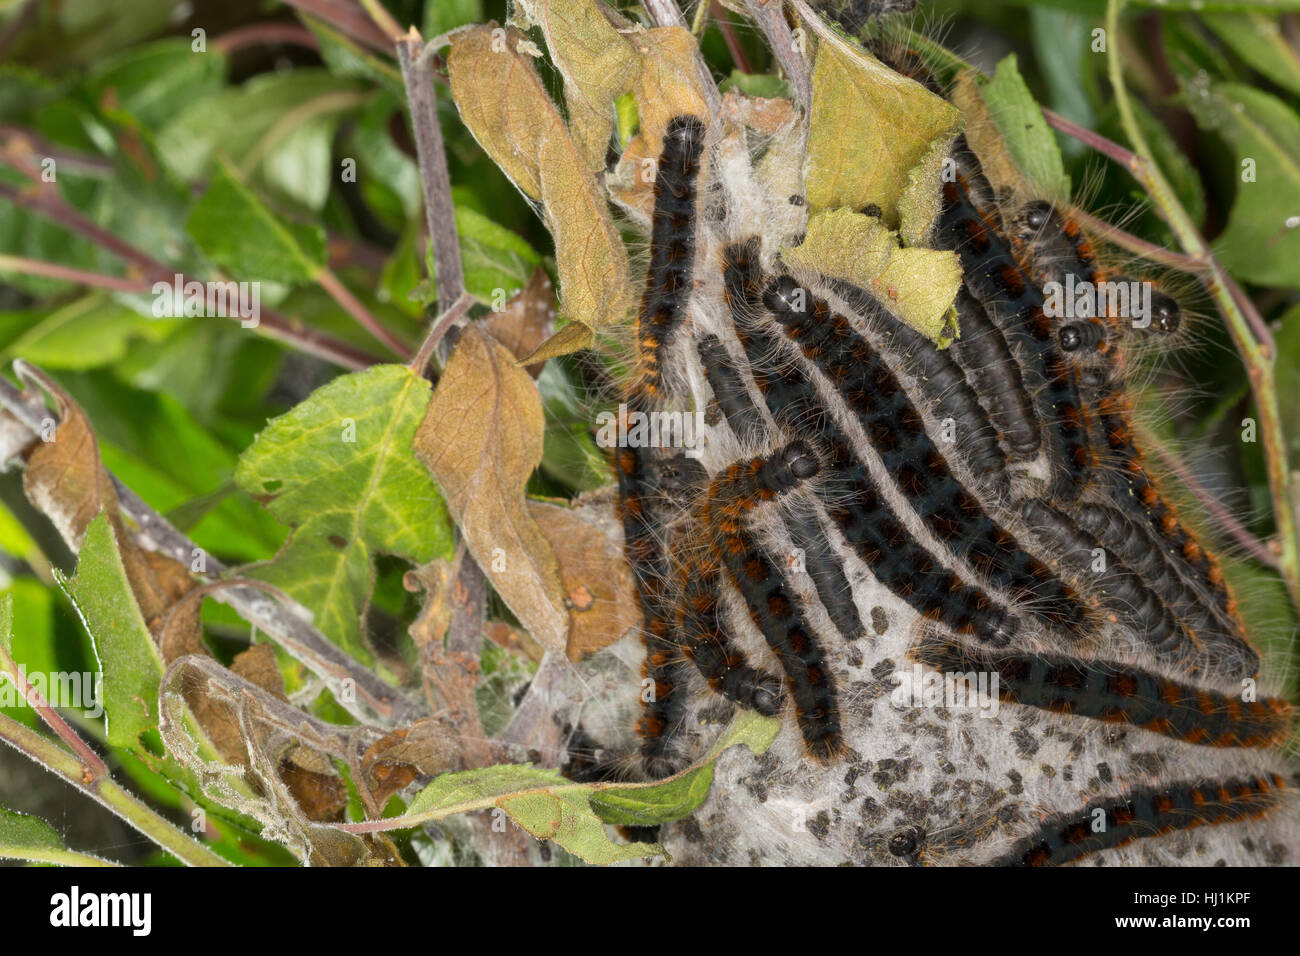 Wollafter, Frühlings-Wollafter, Raupe, Raupen und Raupengespinst, Eriogaster Lanestris, Bombyx Lanestris, kleine Eggar, Raupe, Raupen, Bombyx Stockfoto